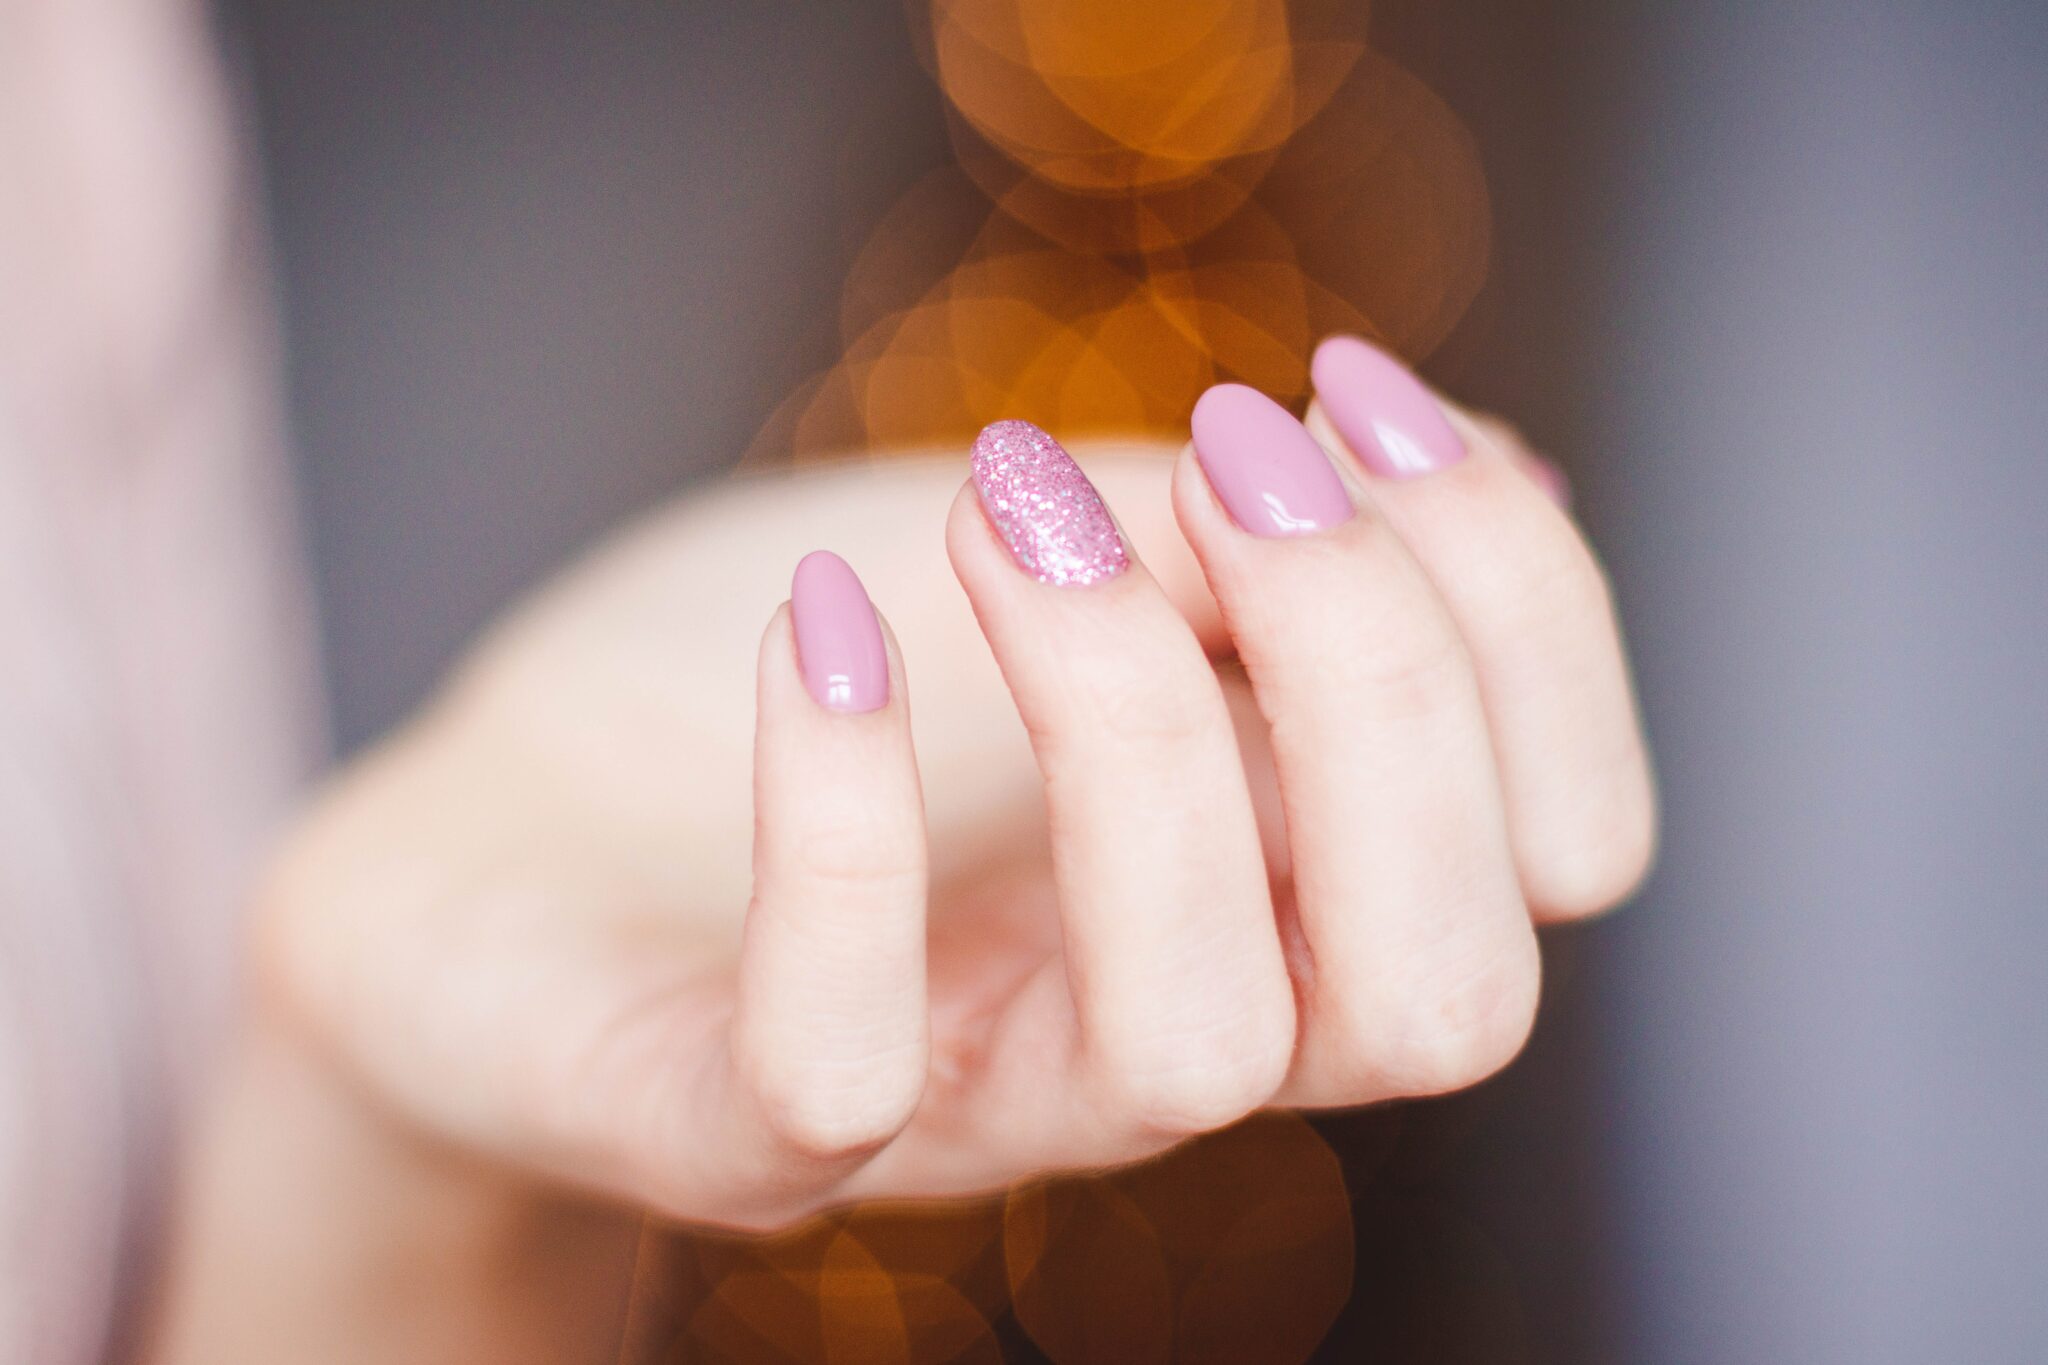 get nails done in mt pleasant, mount pleasant nail salon, manicure in mount pleasant